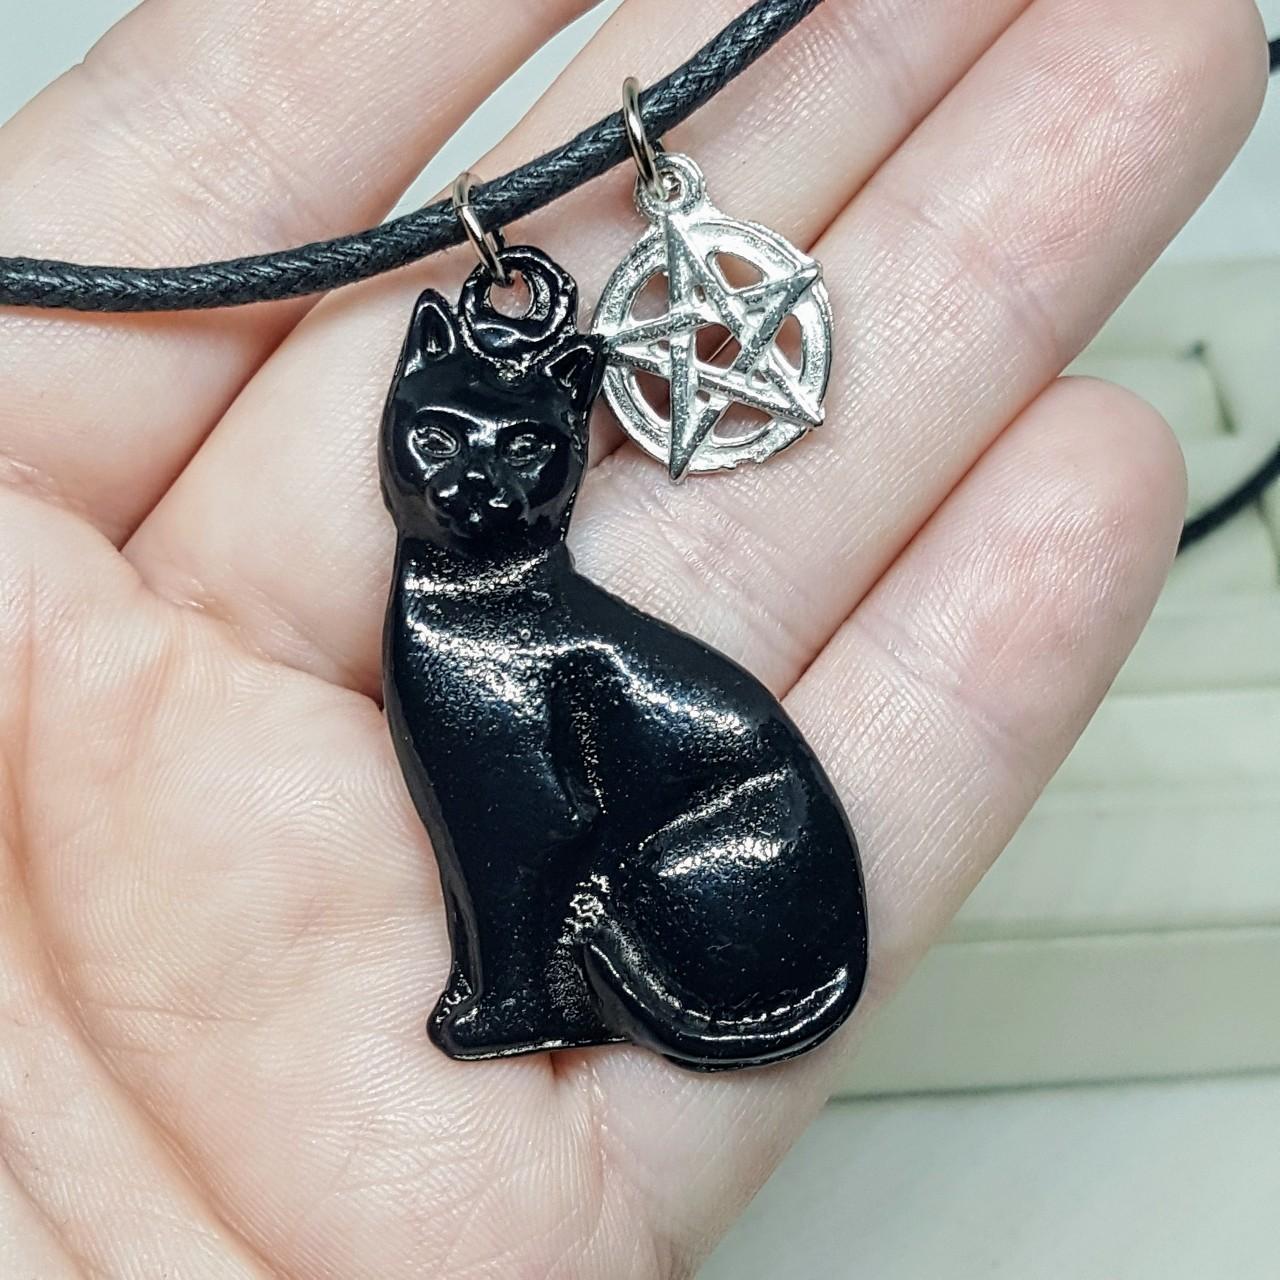 Black Knifecat Necklace, Funny Black Killer Cat Pendant Necklace And  Brooch, Cute Animal Jewellery Gifts | Fruugo MY